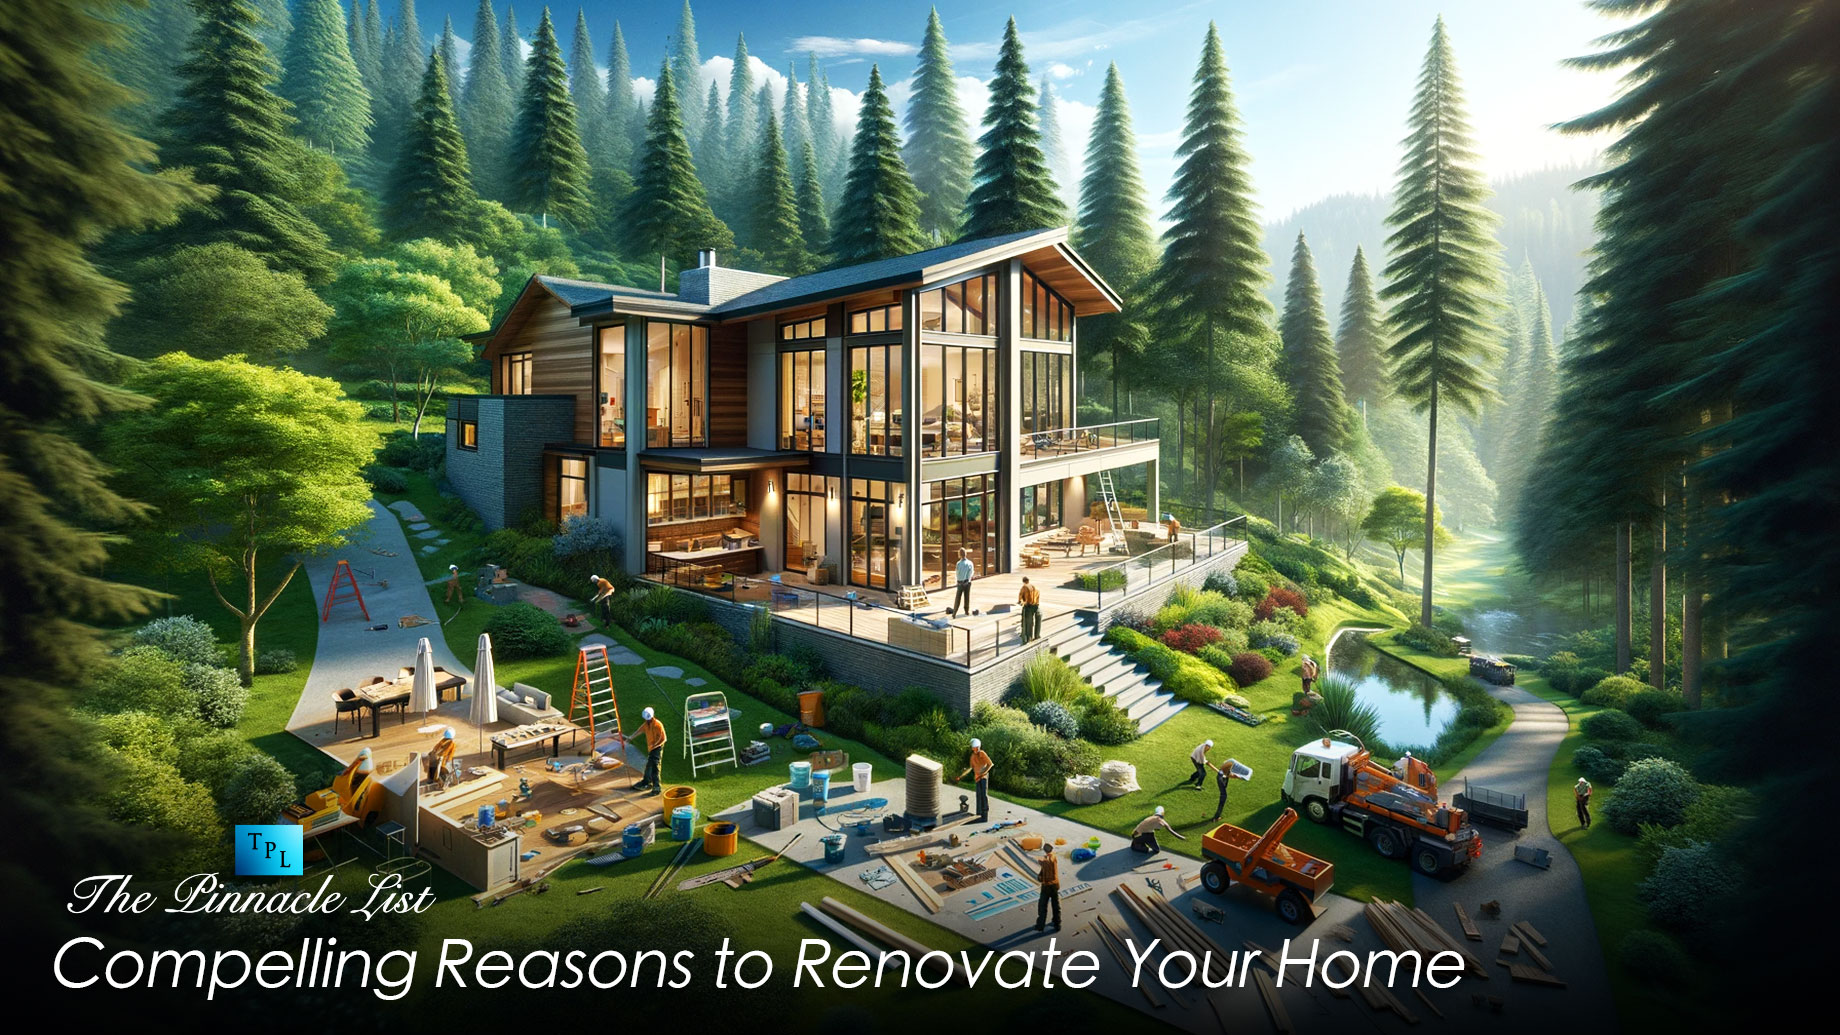 Compelling Reasons to Renovate Your Home